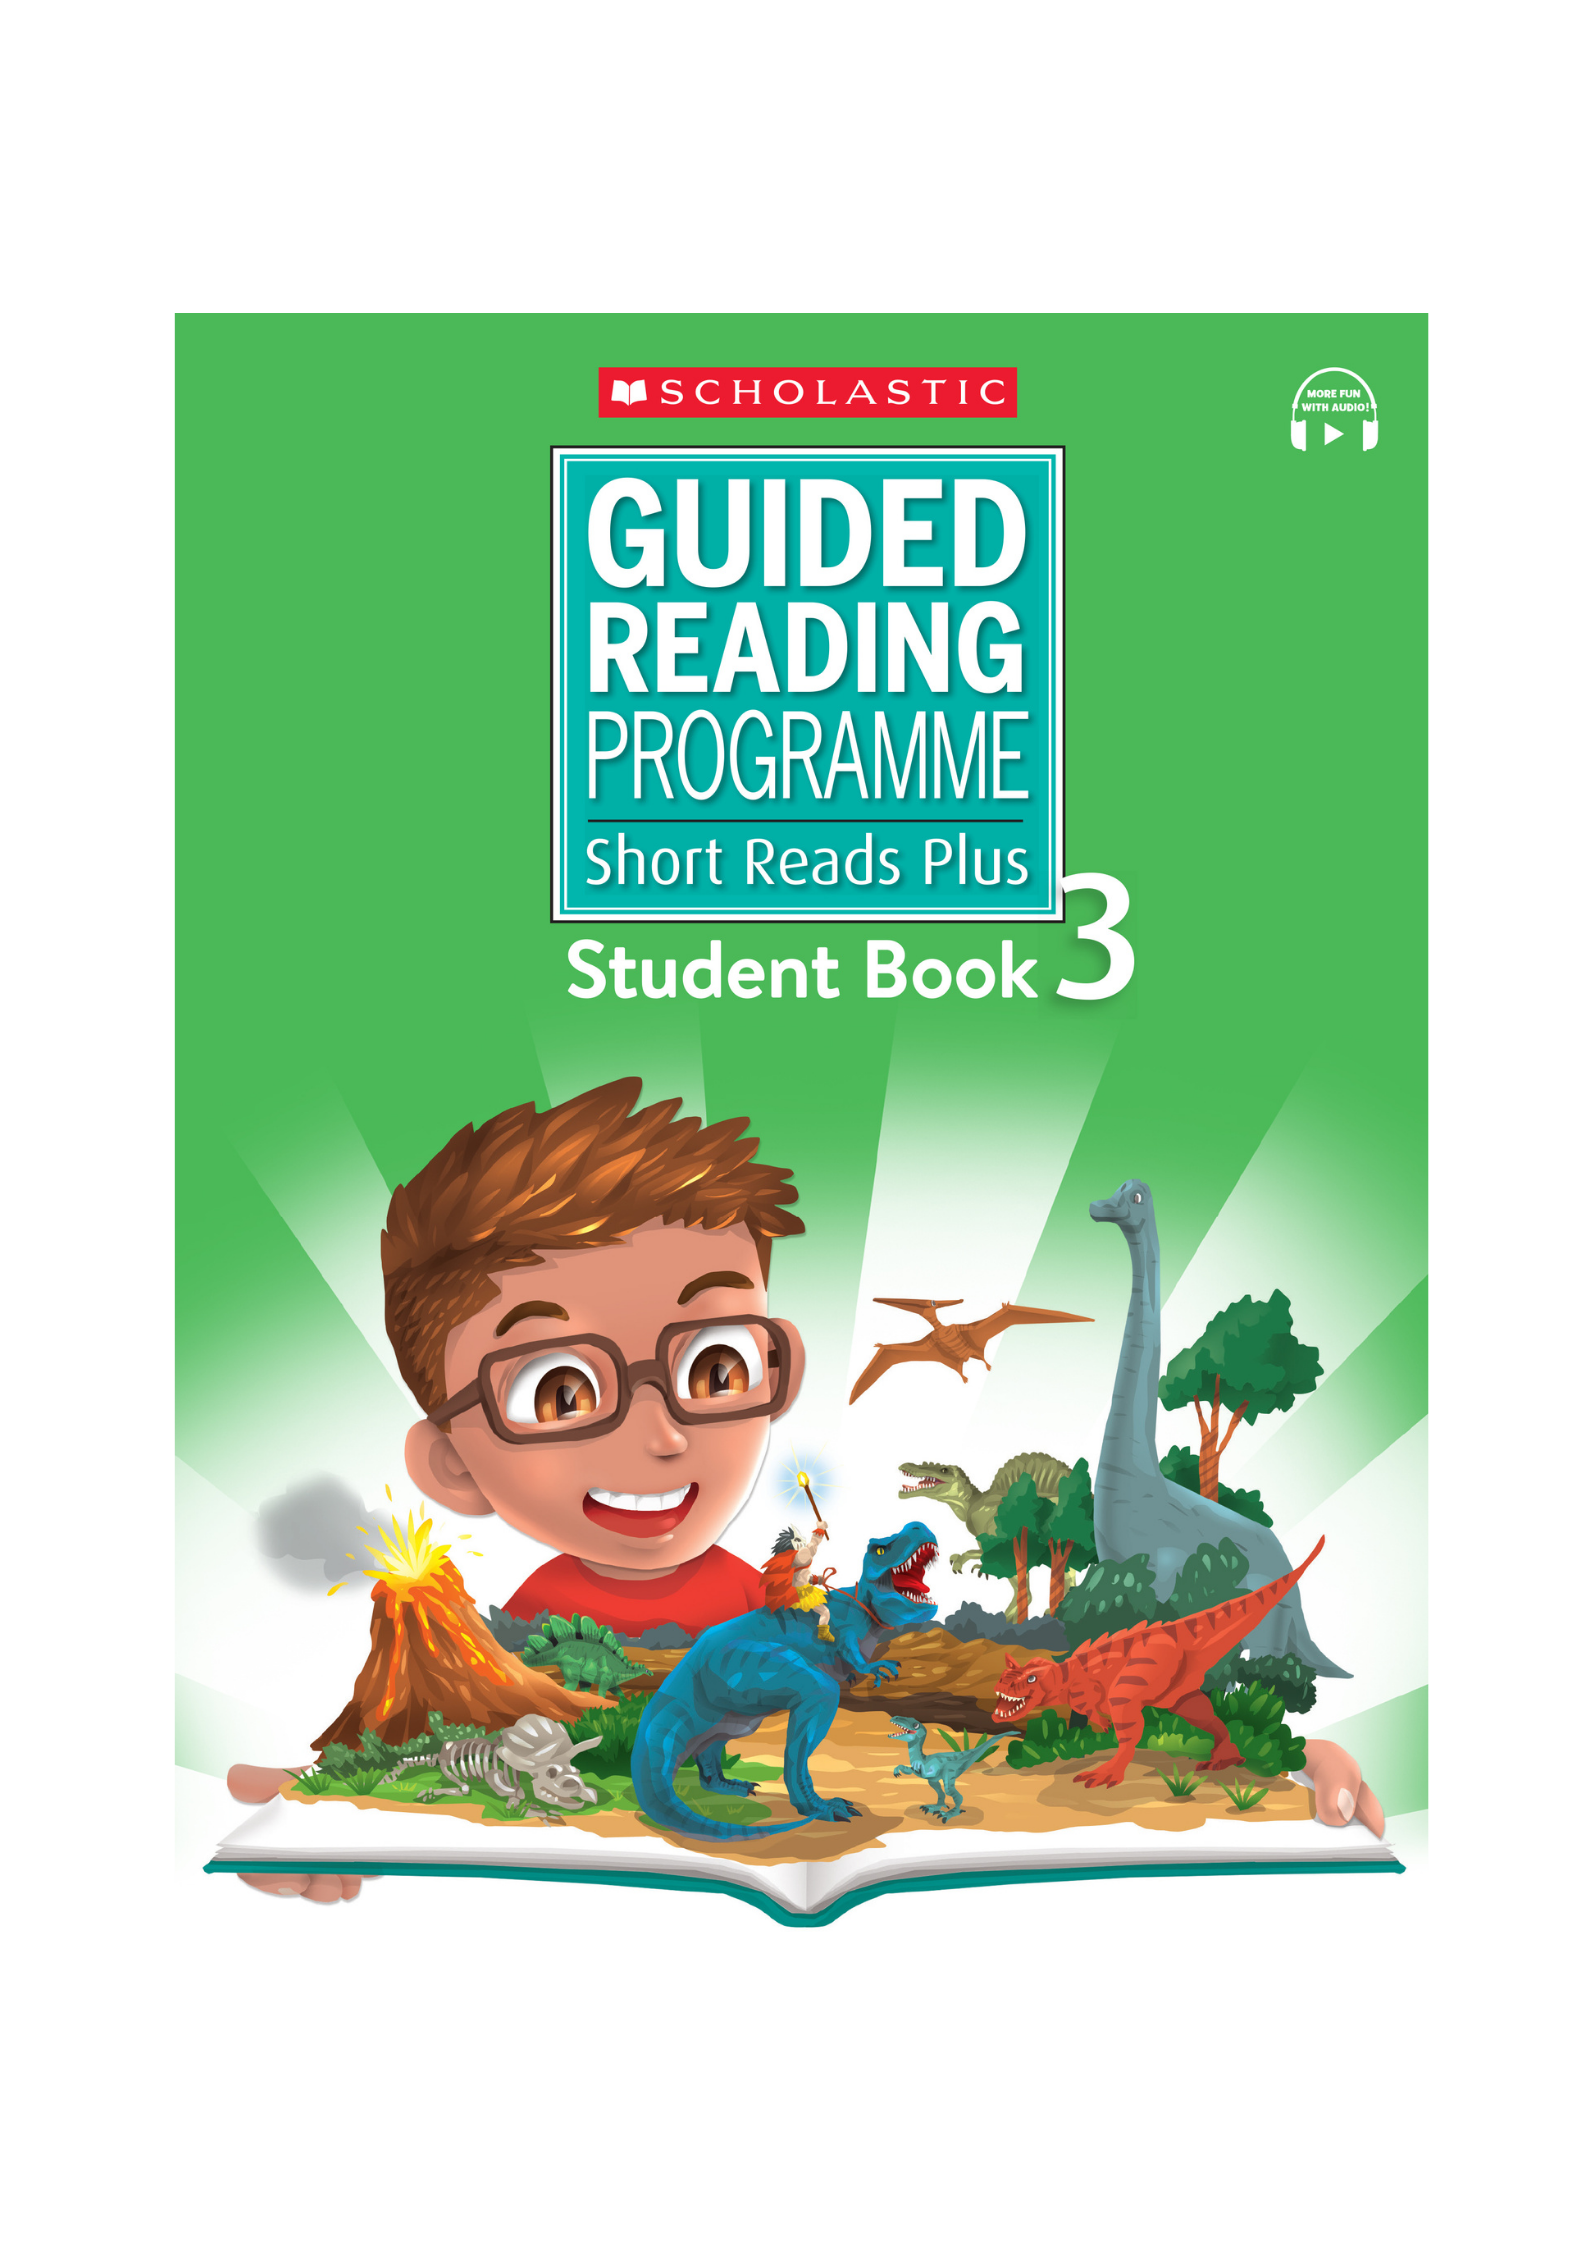 Guided Reading Short Reads Plus Student Book – Level 3 (Asia)